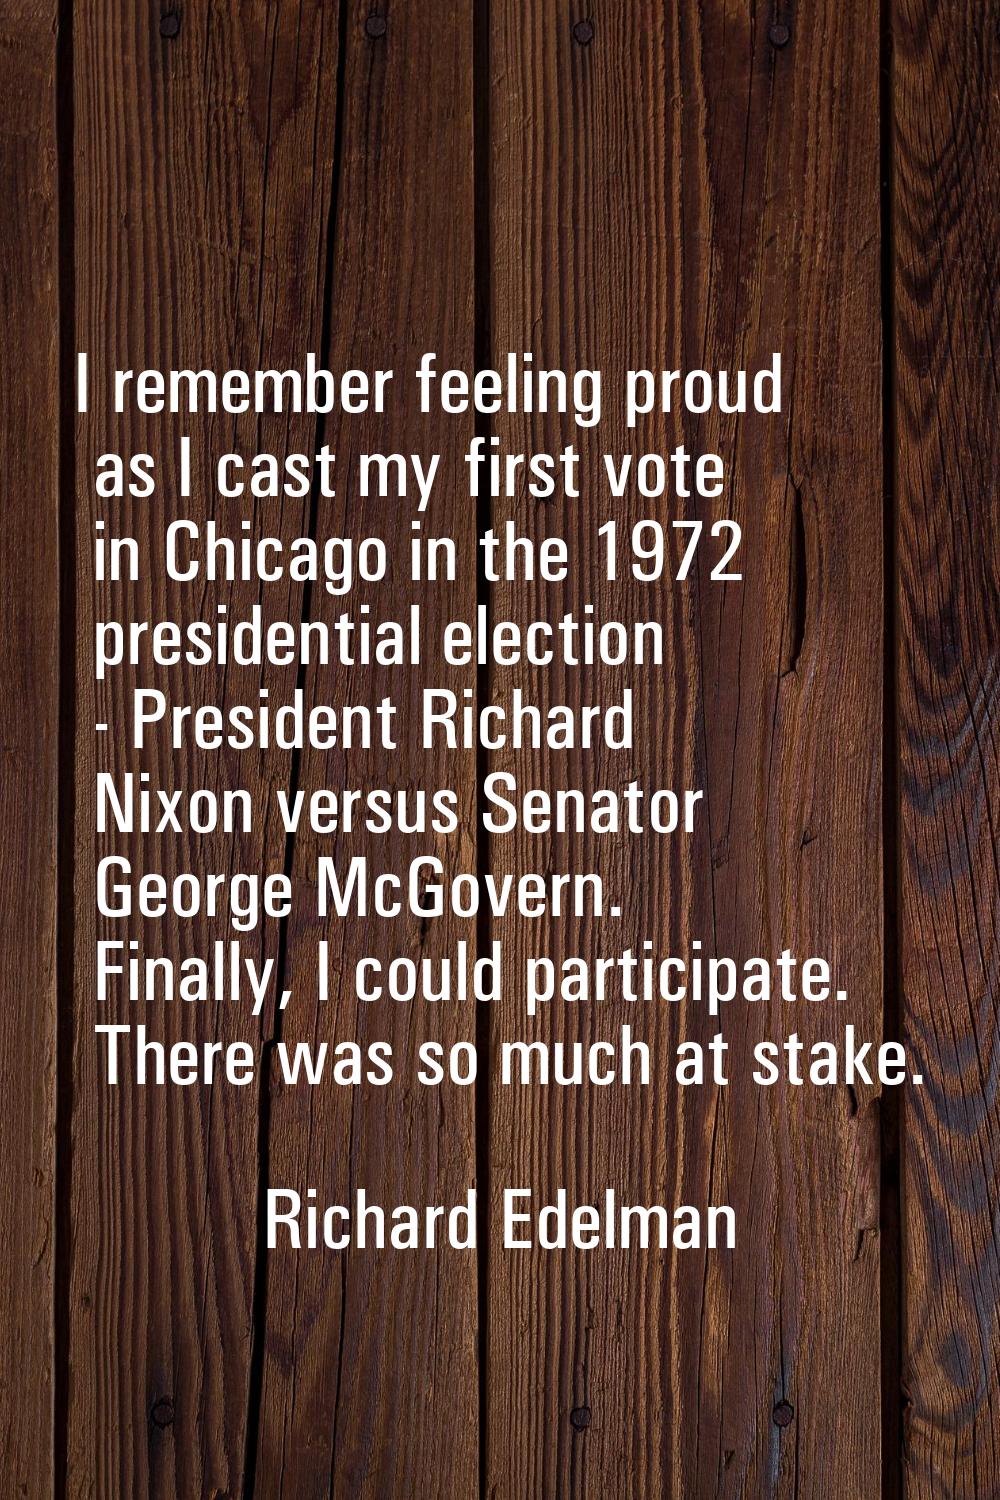 I remember feeling proud as I cast my first vote in Chicago in the 1972 presidential election - Pre